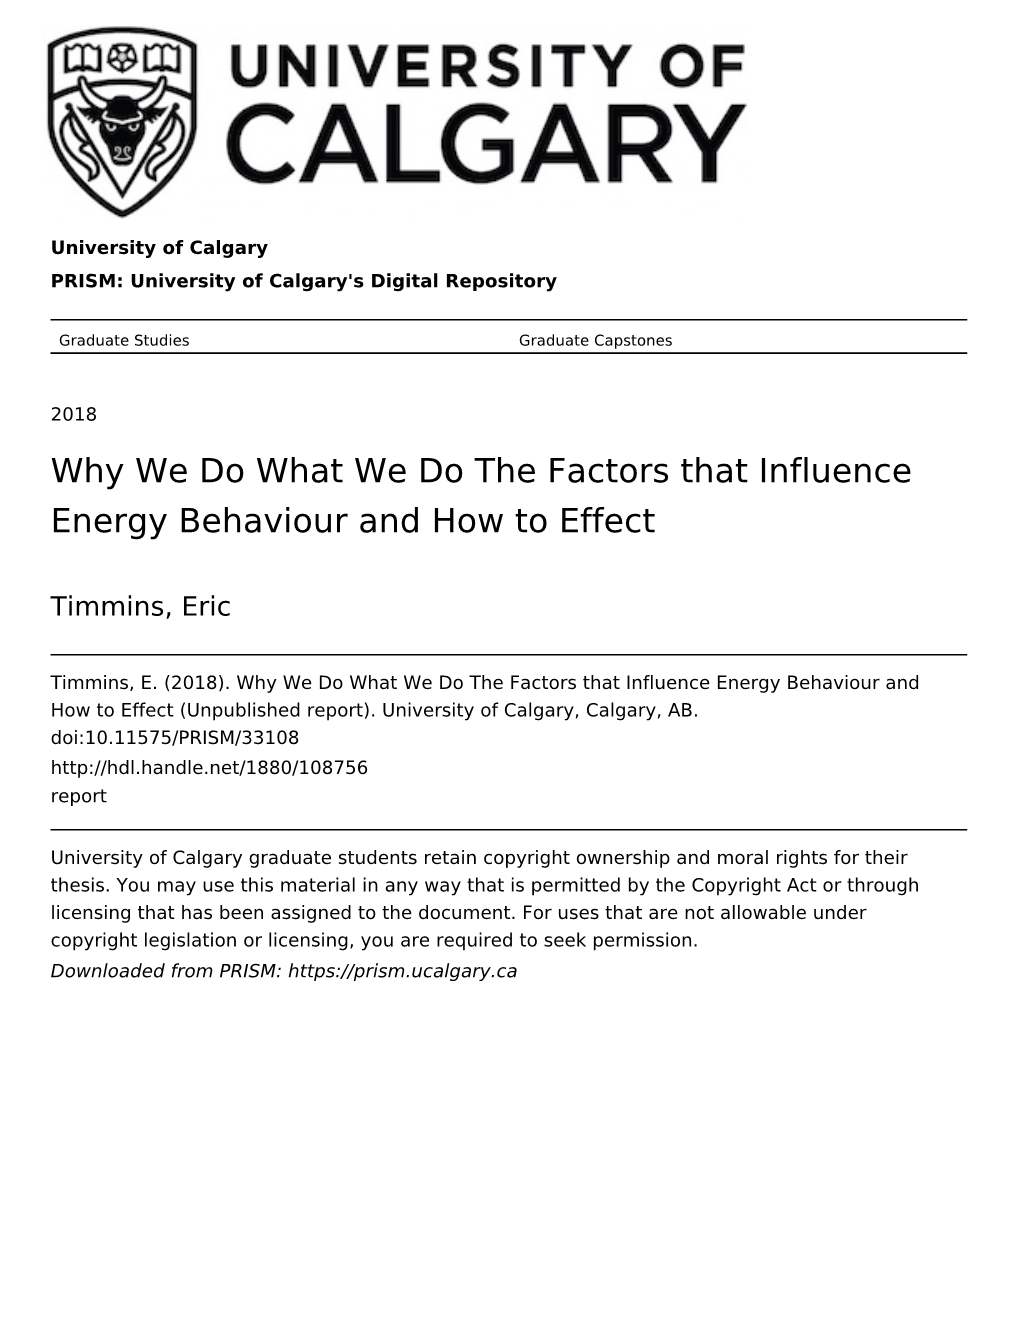 Why We Do What We Do the Factors That Influence Energy Behaviour and How to Effect